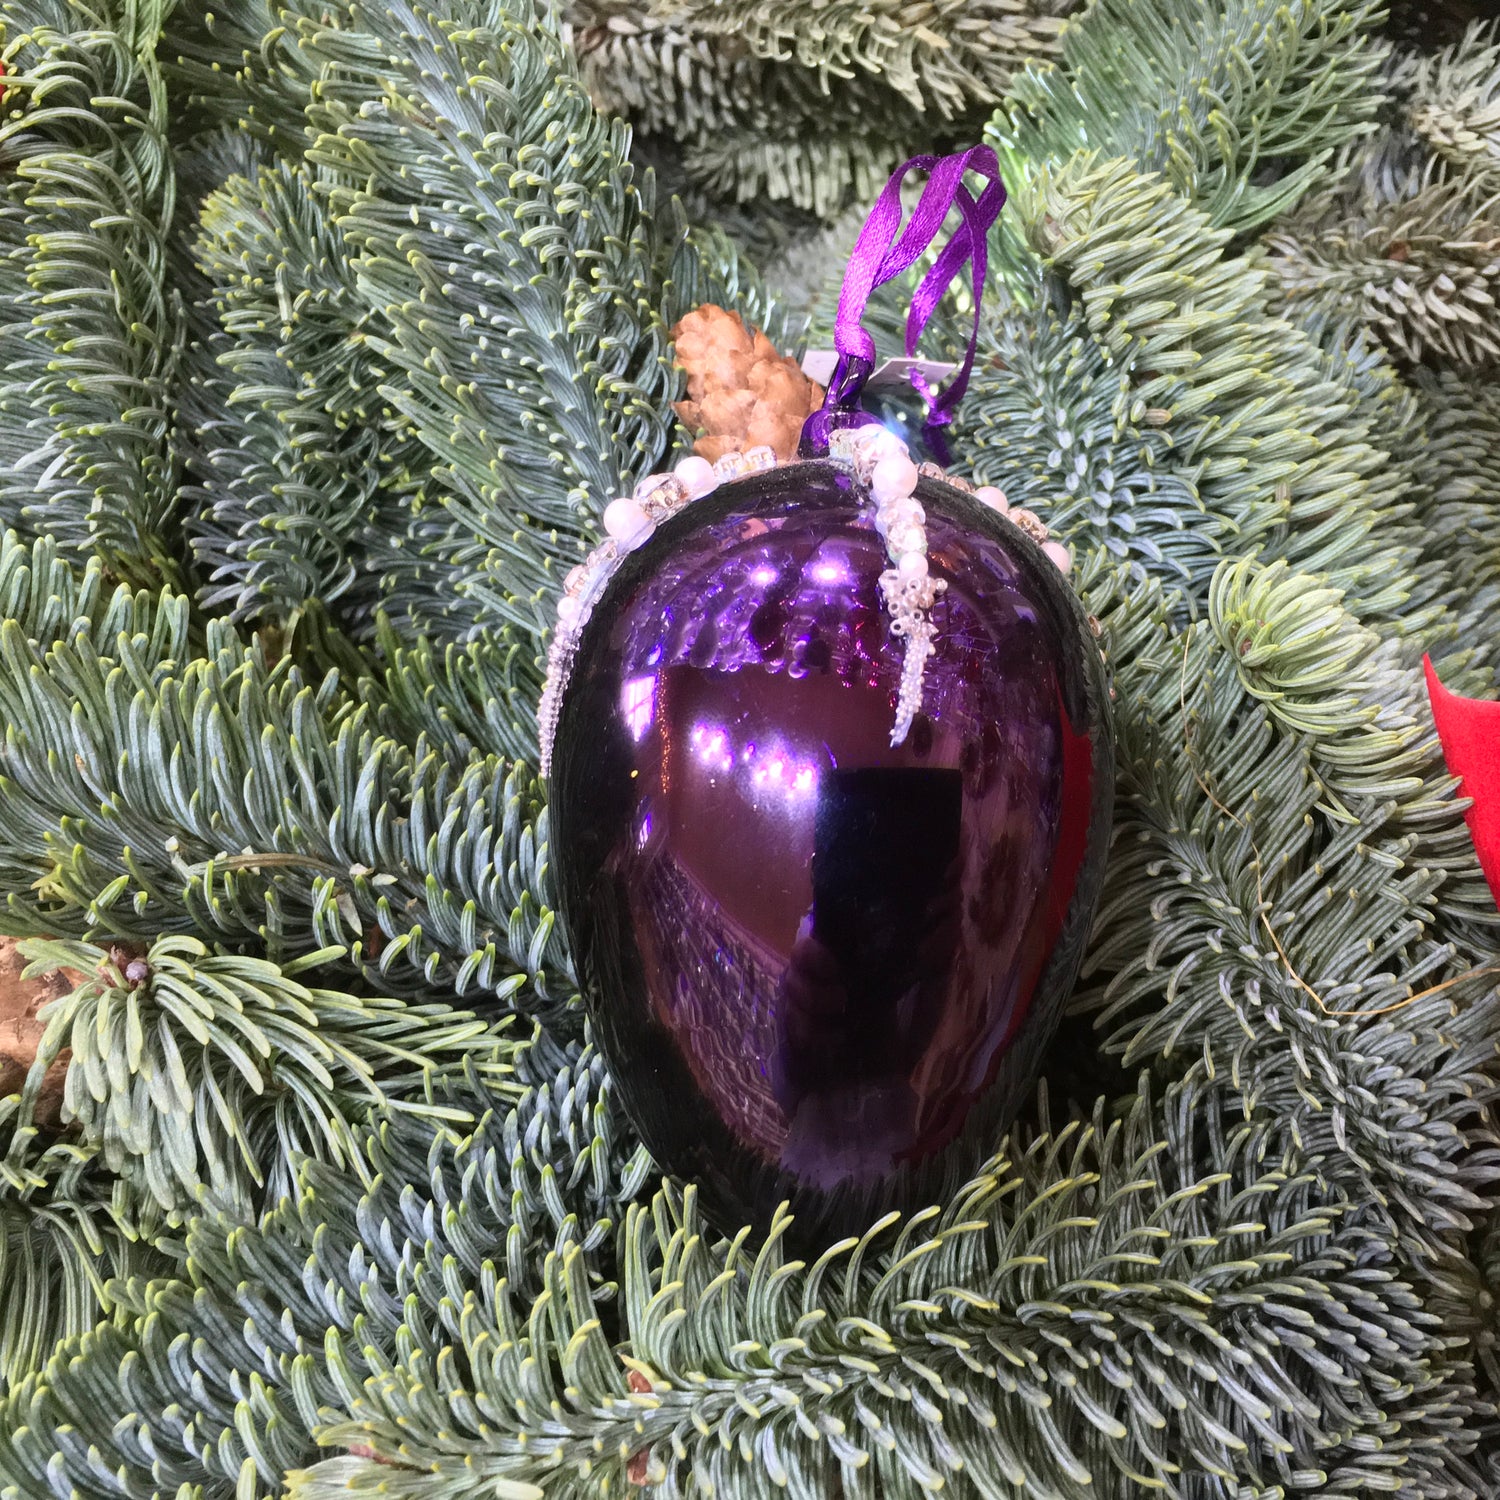 This shiny purple egg shape Christmas ornament is made from glass and decorated with beads, pearls and diamonte.